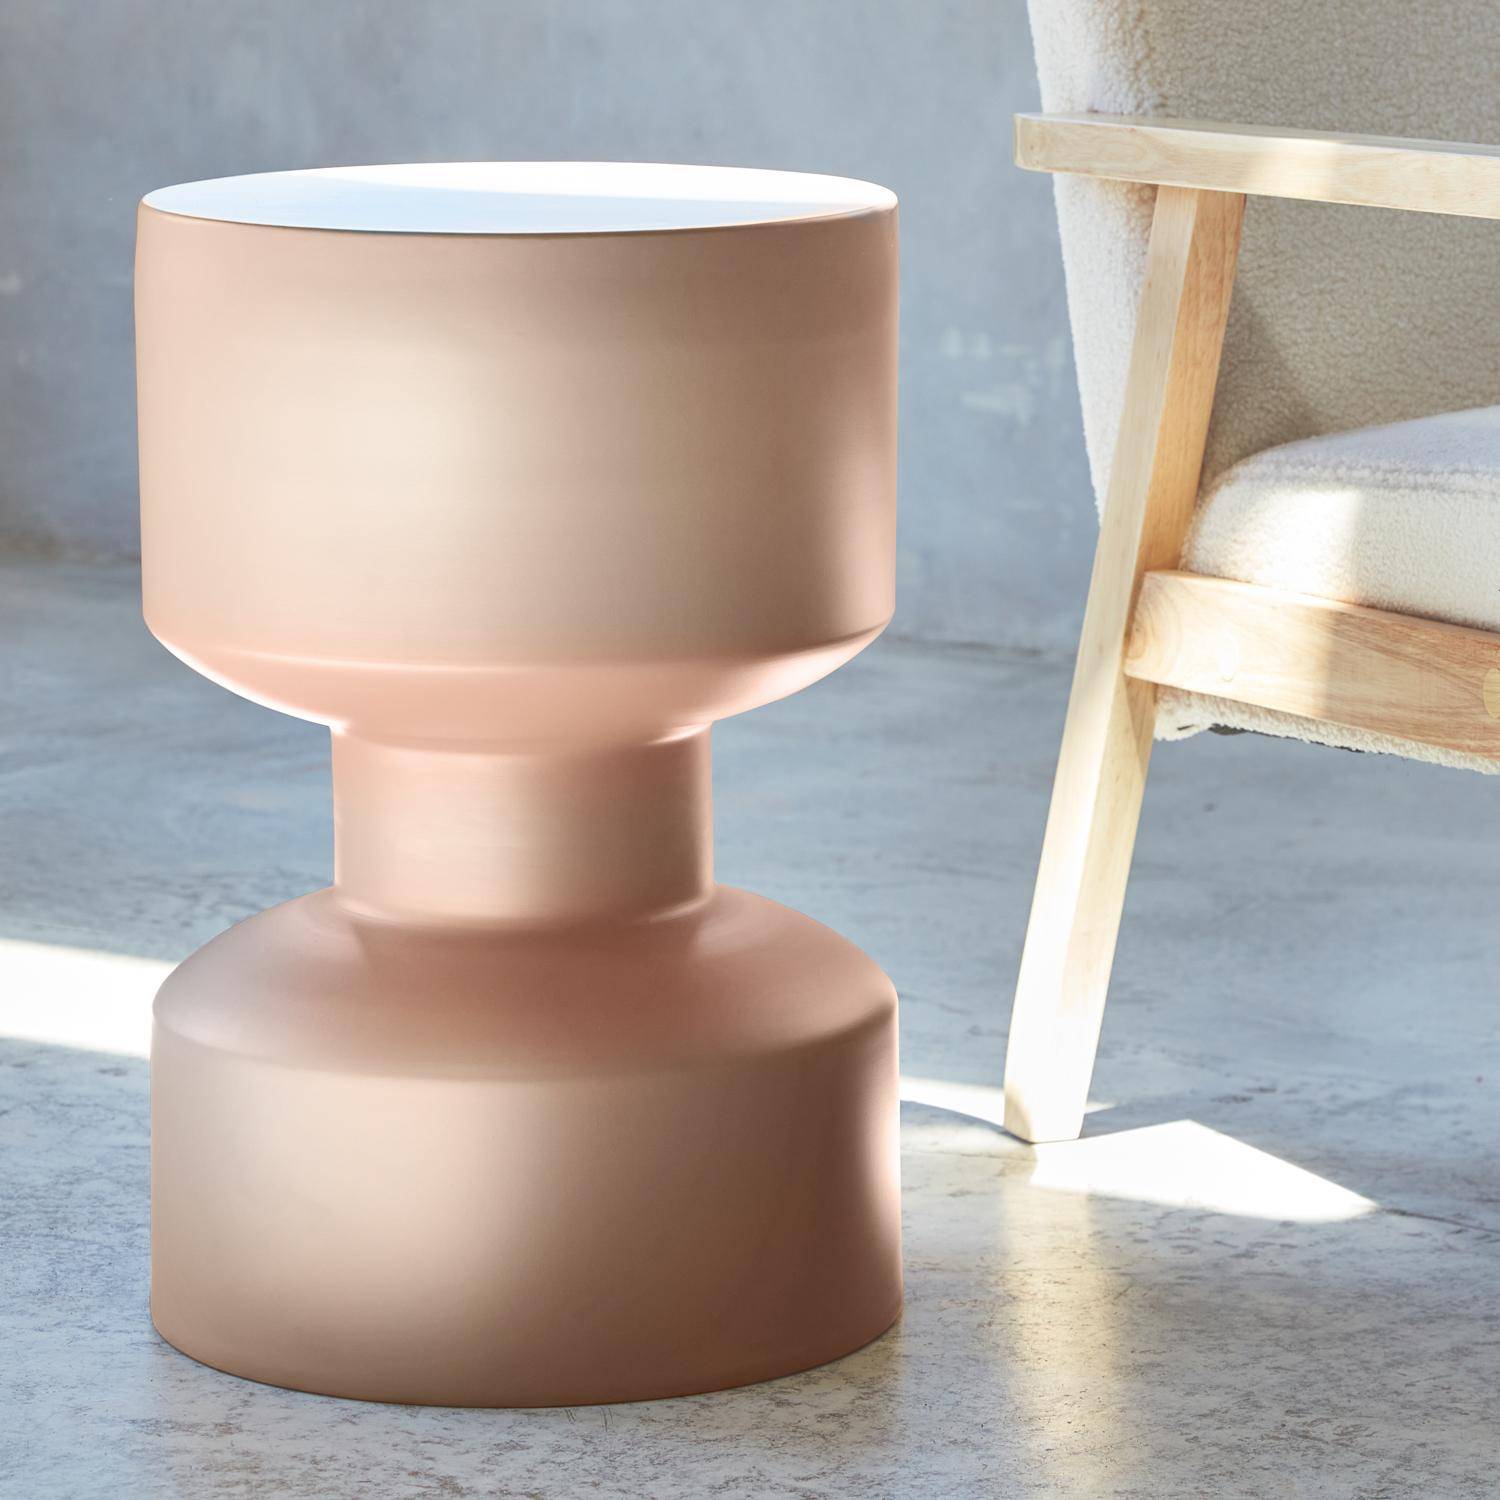 End table, sofa side table, metal bedside table, Ø30 x H 47cm, pink,sweeek,Photo1